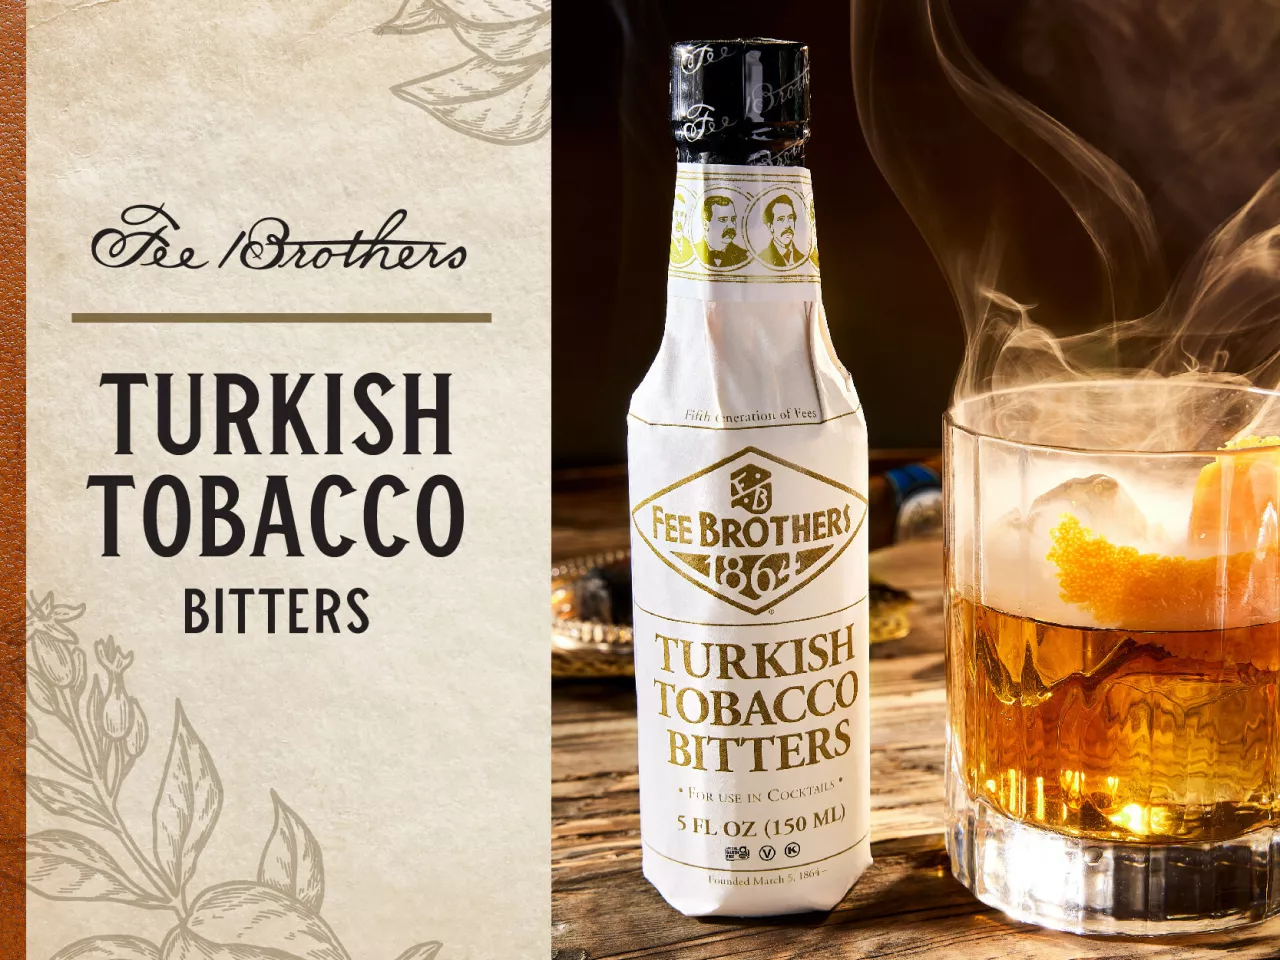 Fee Brothers Turkish Tobacco Bitters offer the rich flavors of sun-cured tobacco with notes of coffee, clove, and nutmeg img#1